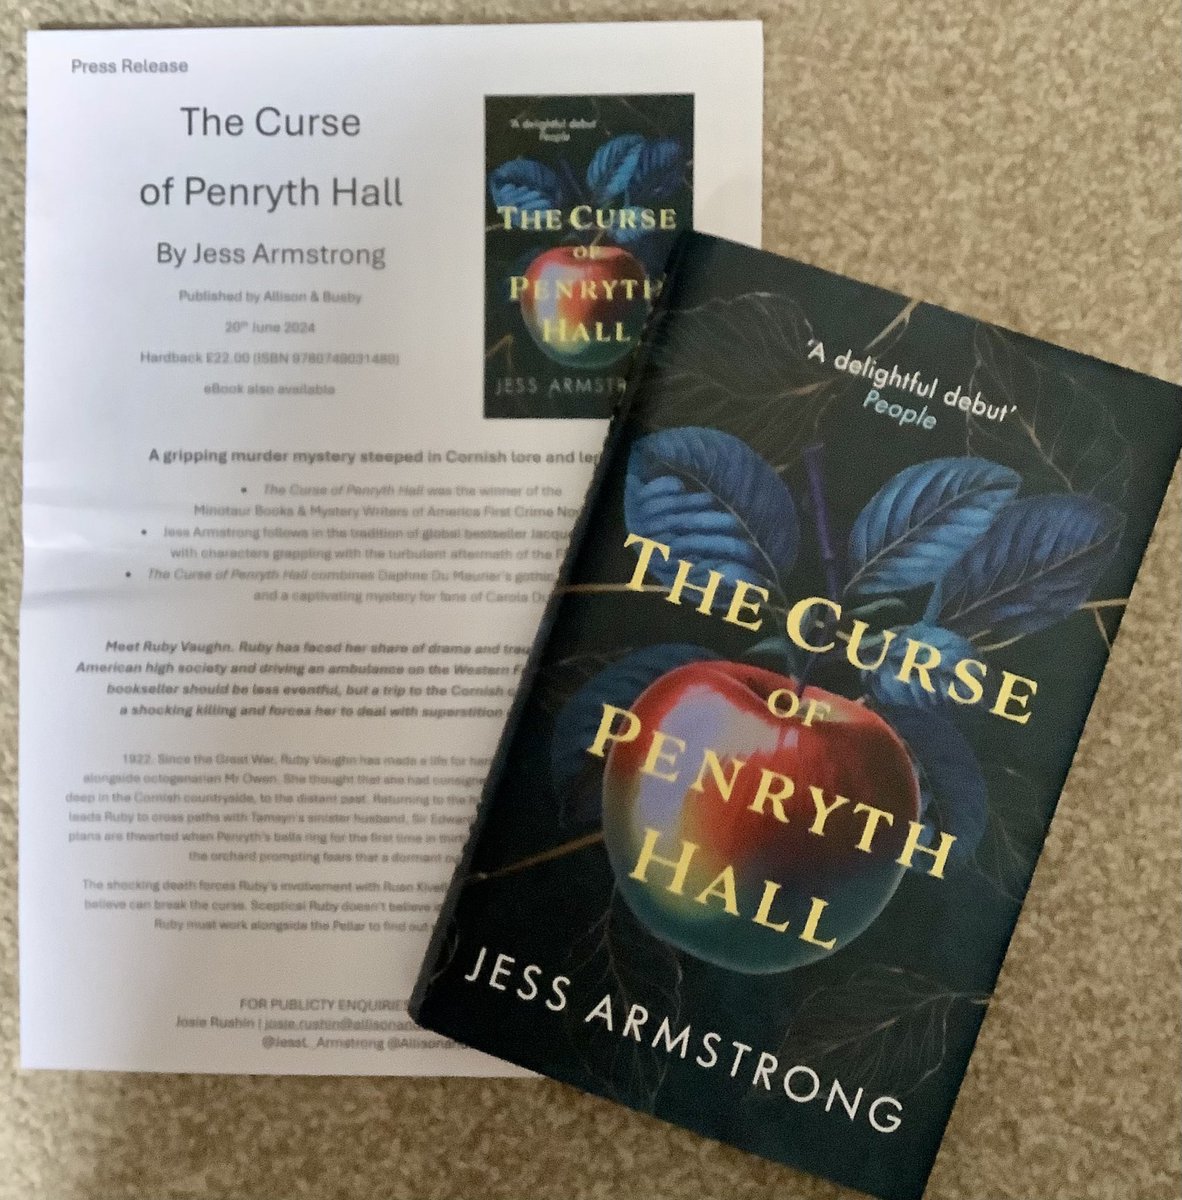 📮📮BOOK POST📮📮 Many thanks @AllisonandBusby for my copy of #TheCurseOfPenrythHall by @JessL_Armstrong ahead of the blog tour. “ a gripping murder mystery steeped in Cornish lore and legend”. This sounds right up my street. Published 20th June